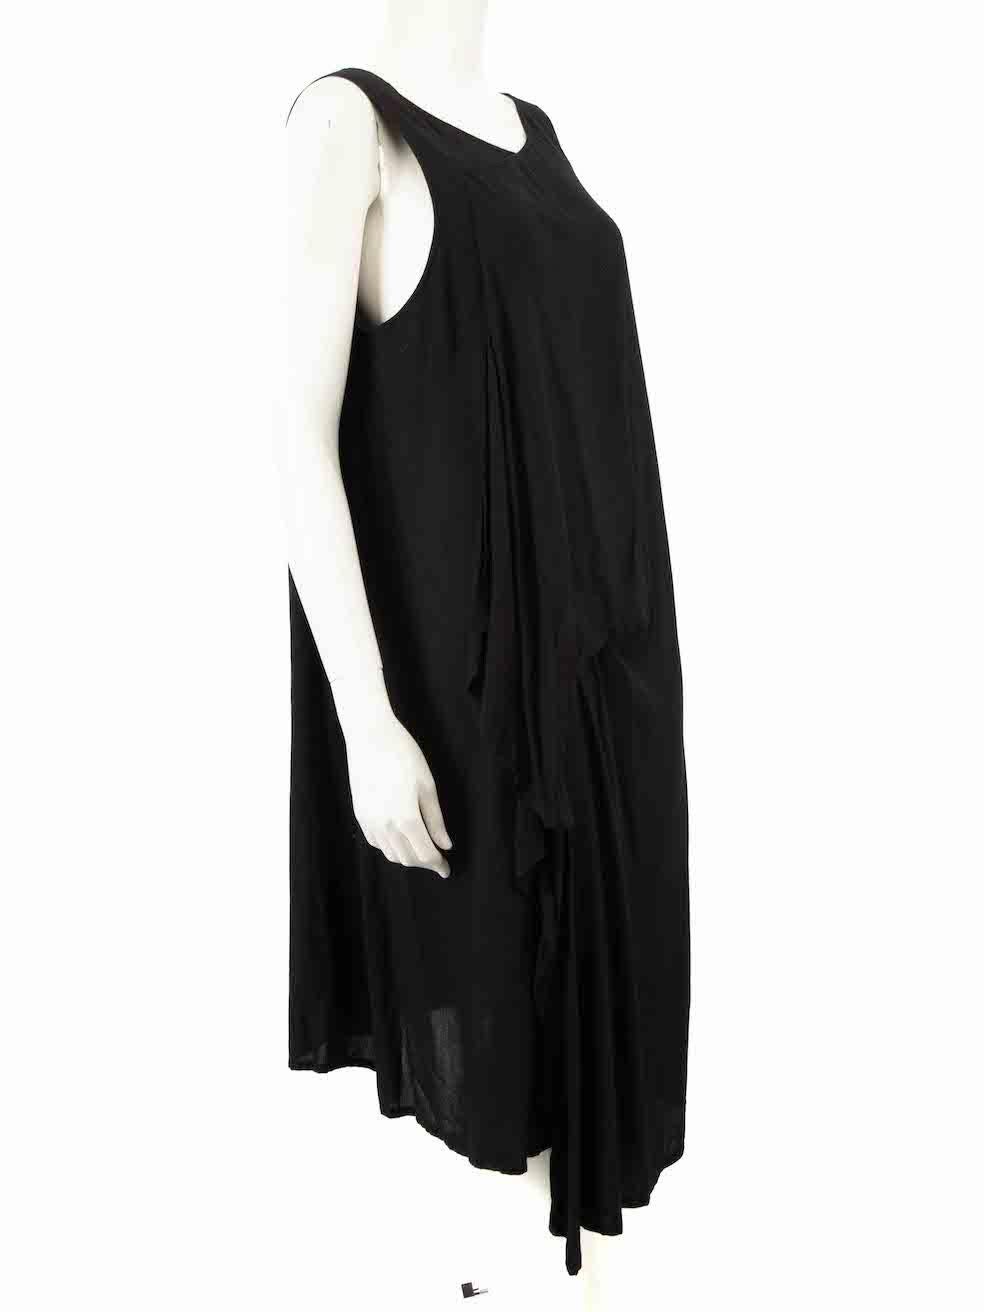 CONDITION is Very good. Hardly any visible wear to dress is evident on this used Yohji Yamamoto designer resale item.
 
 
 
 Details
 
 
 Black
 
 Rayon
 
 Dress
 
 Sleeveless
 
 Midi
 
 Round neck
 
 Back asymmetric detail
 
 1x Side pocket
 
 
 
